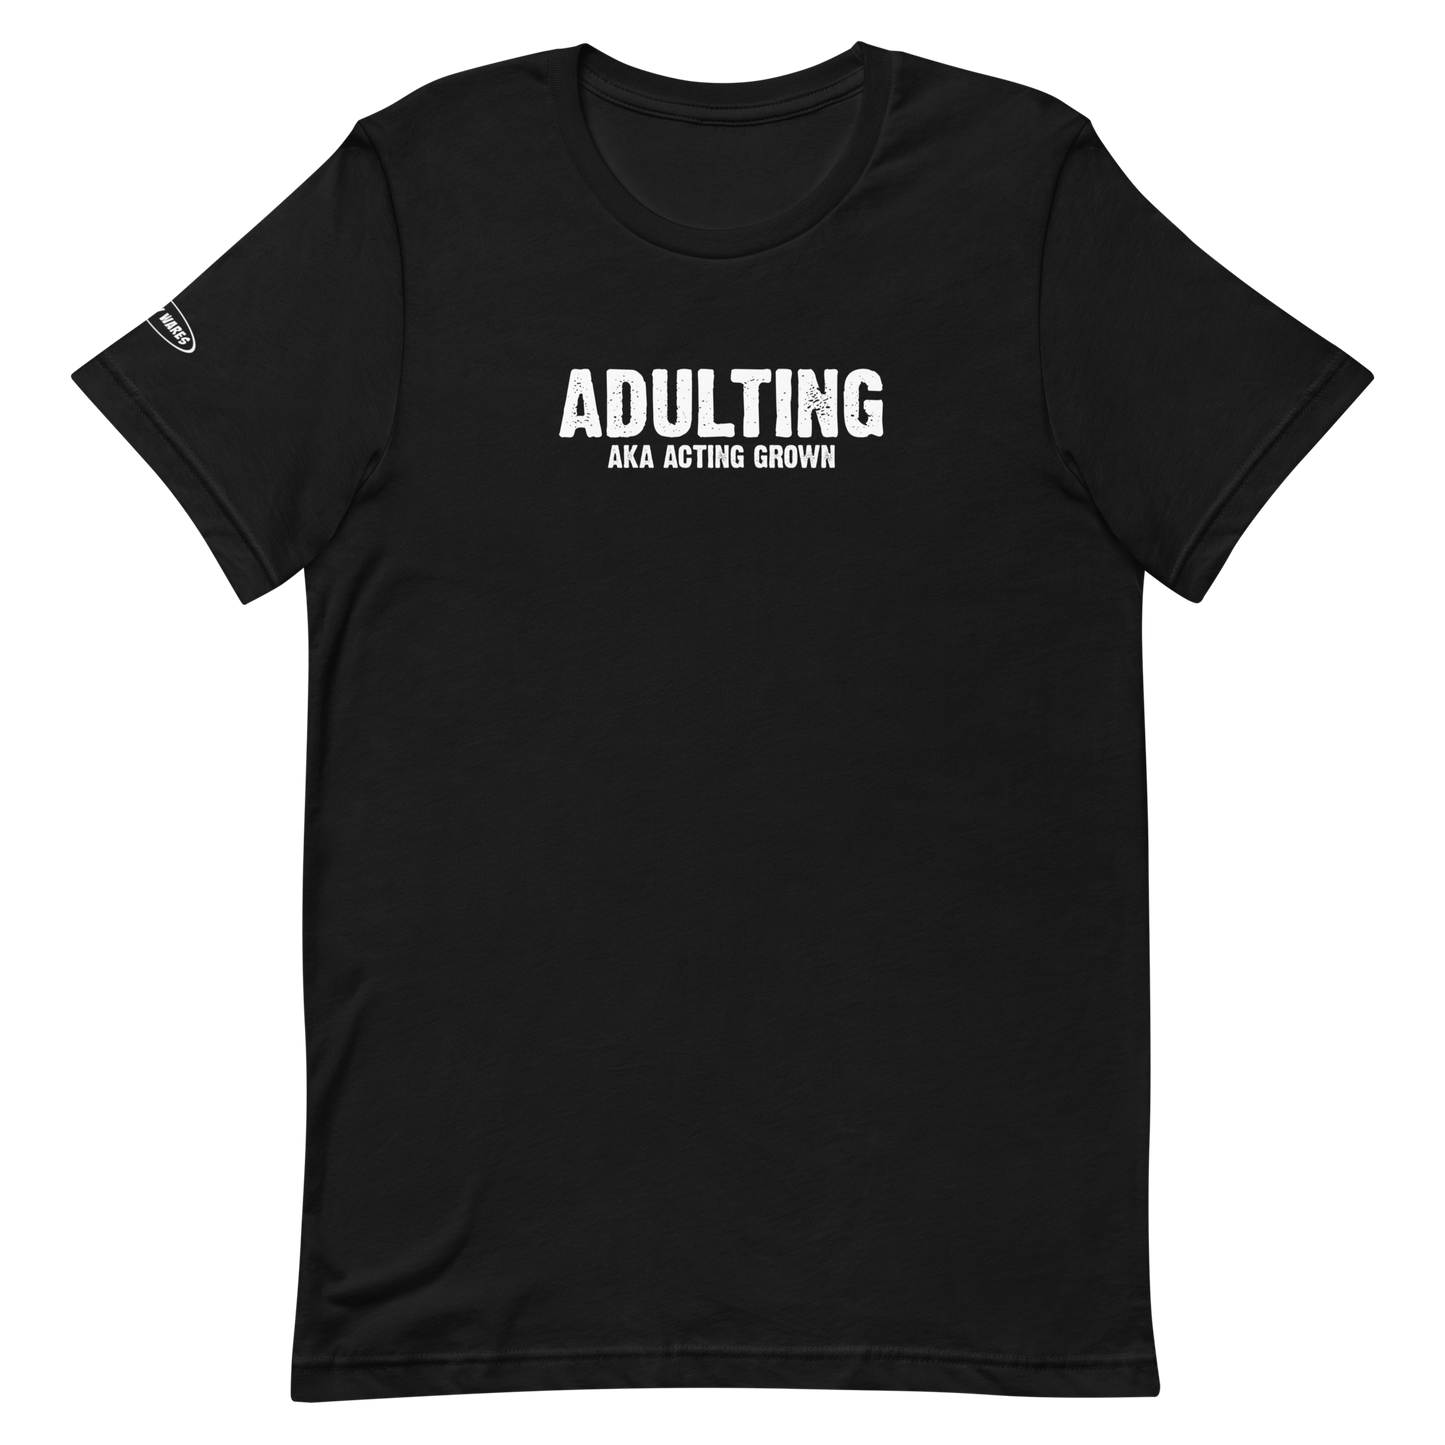 Unisex - Adulting, AKA Acting Grown - Funny T-Shirt